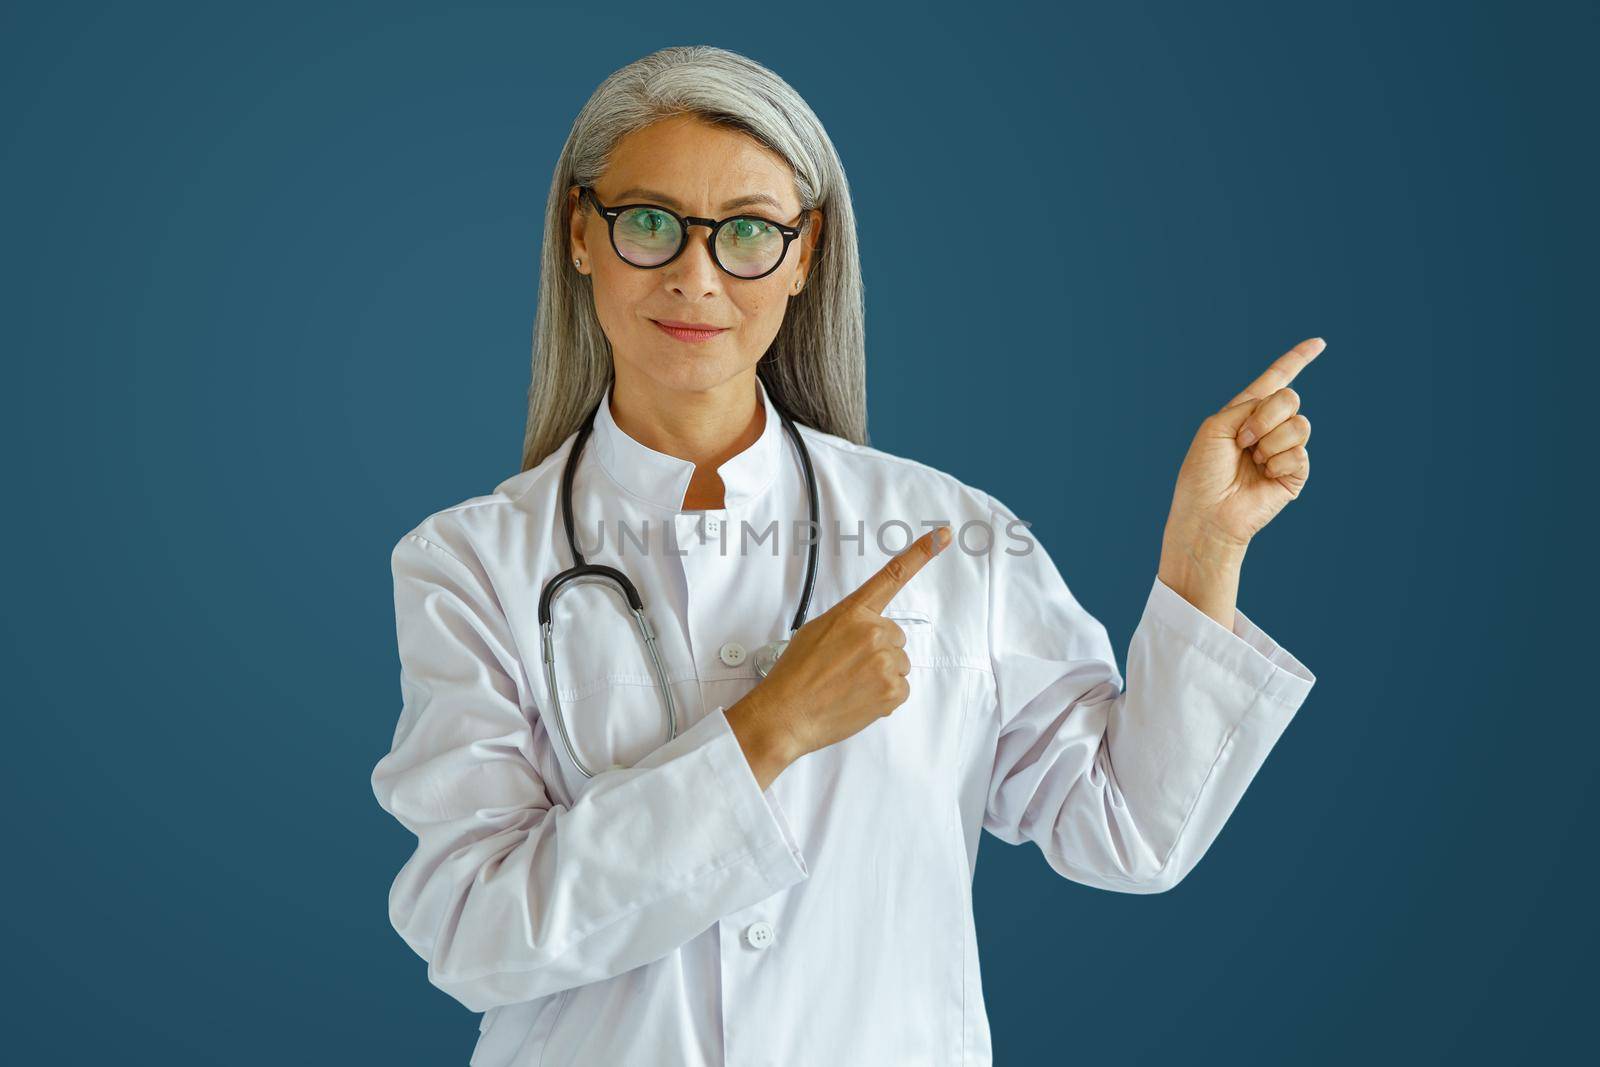 Smiling middle aged woman doctor in white uniform with glasses points aside posing on blue background in studio. Professional medical staff